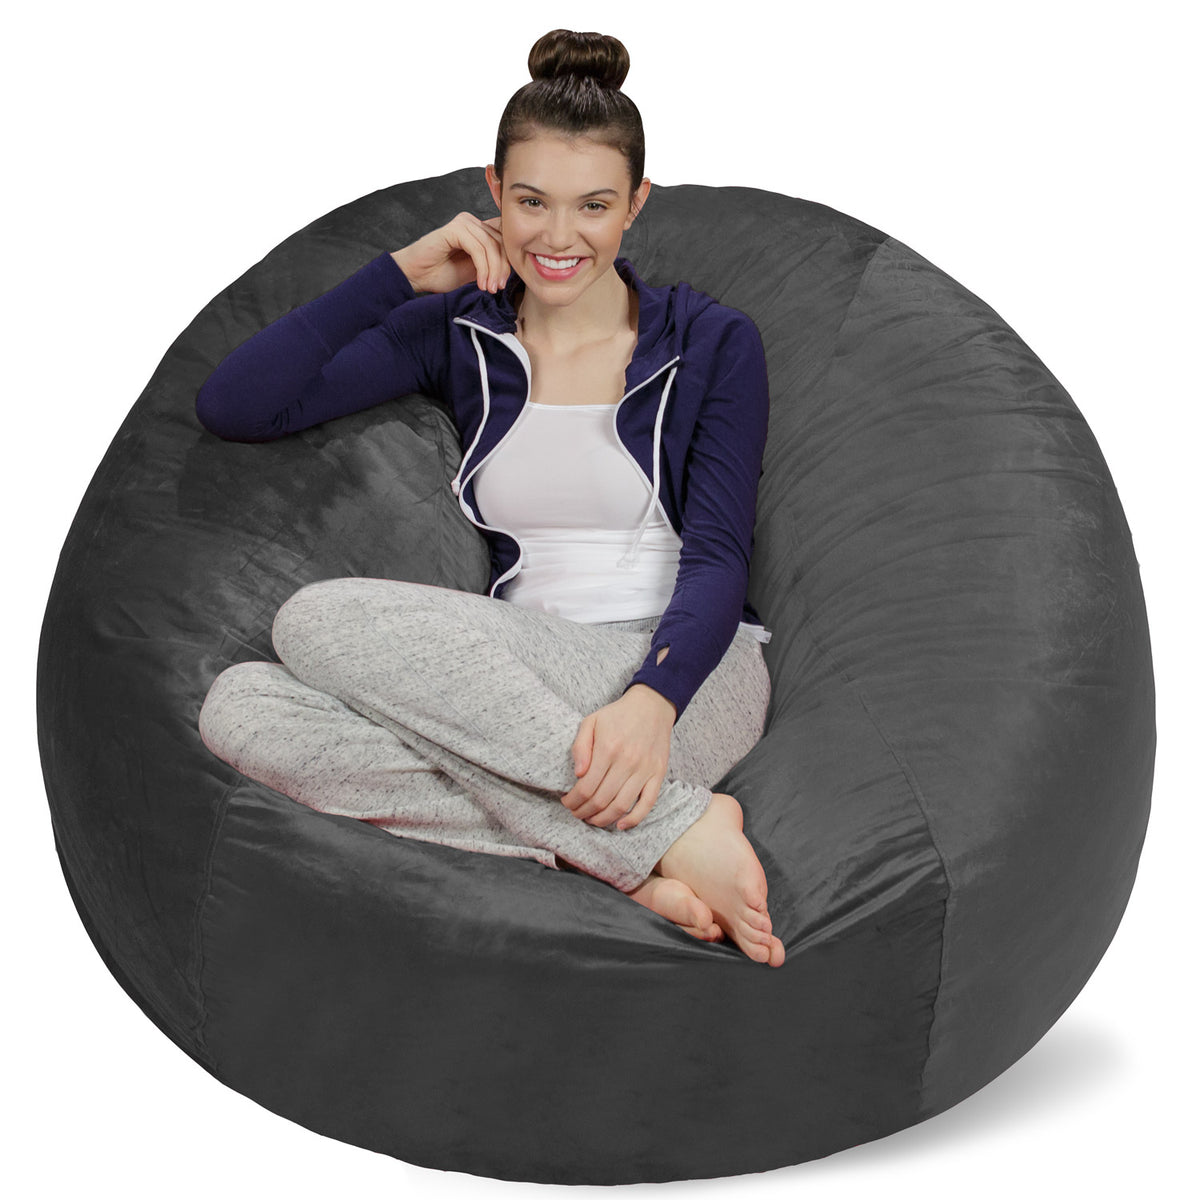 Ultimate Sack 5000 (5 ft.) Bean Bag Chair in multiple colors: Giant  Foam-Filled Furniture - Machine Washable Covers, Double Stitched Seams,  Durable